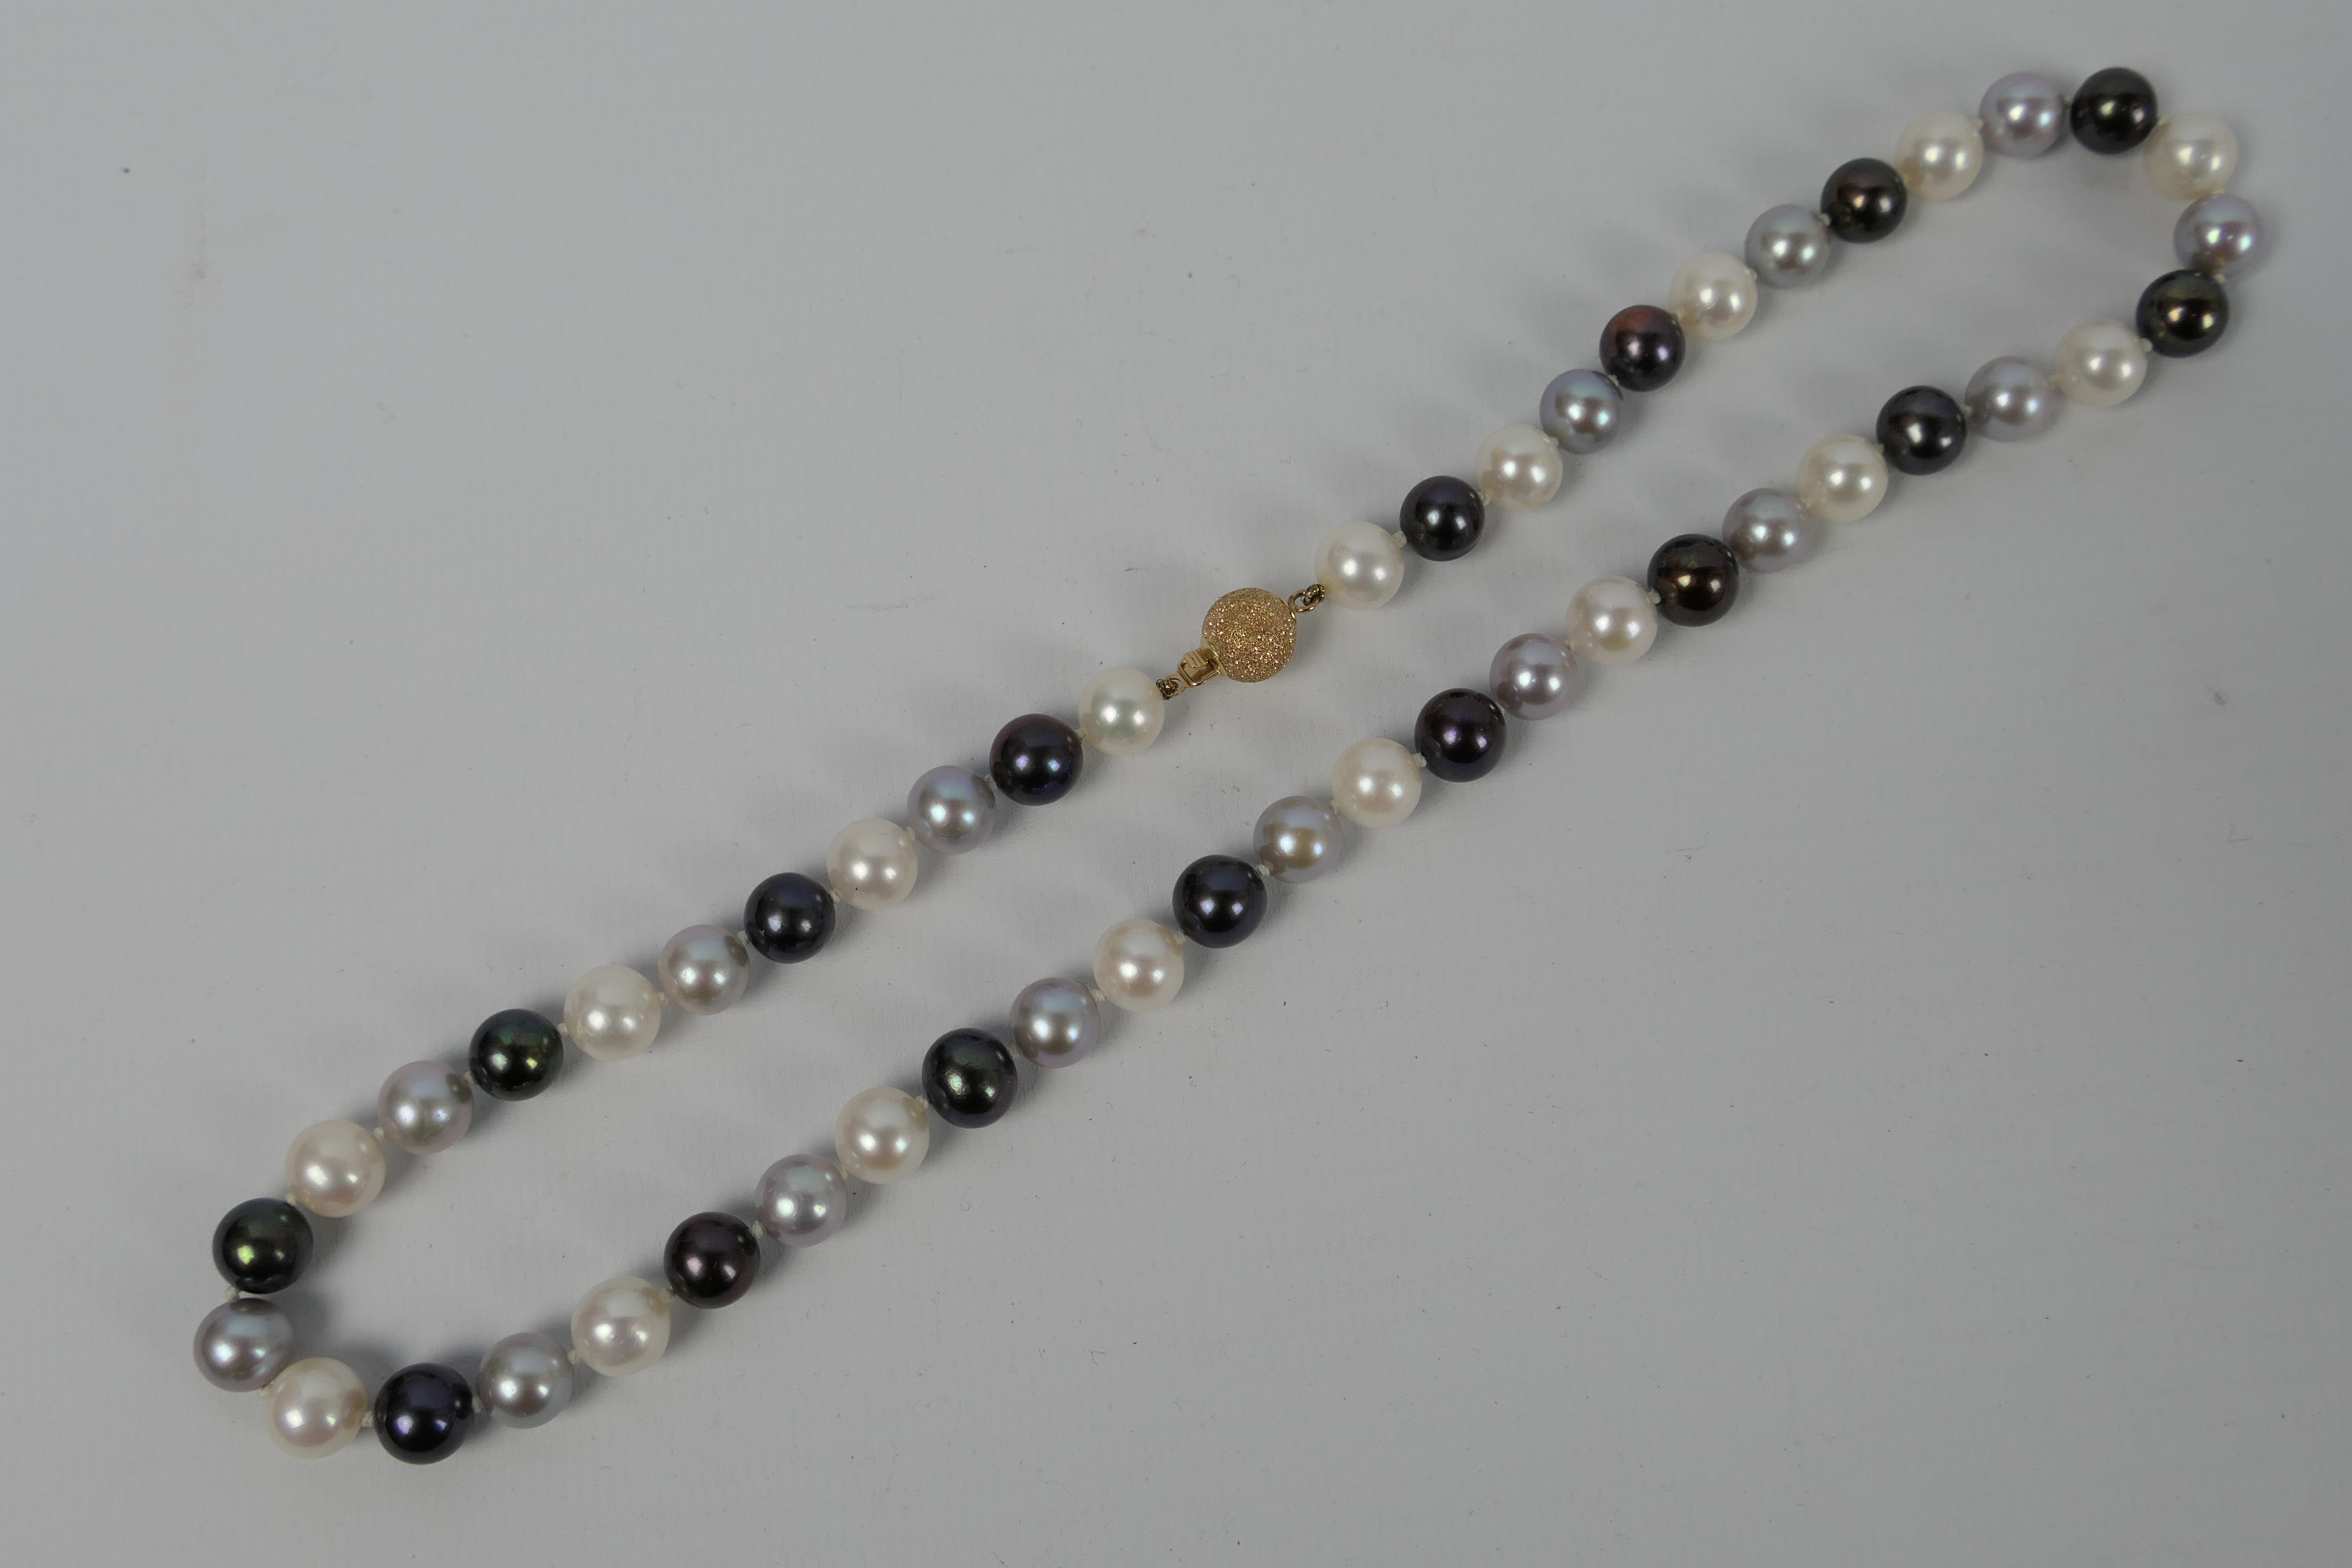 A pearl necklace compromising black, grey and white alternating pearls, each approximately 9 mm, - Image 3 of 6